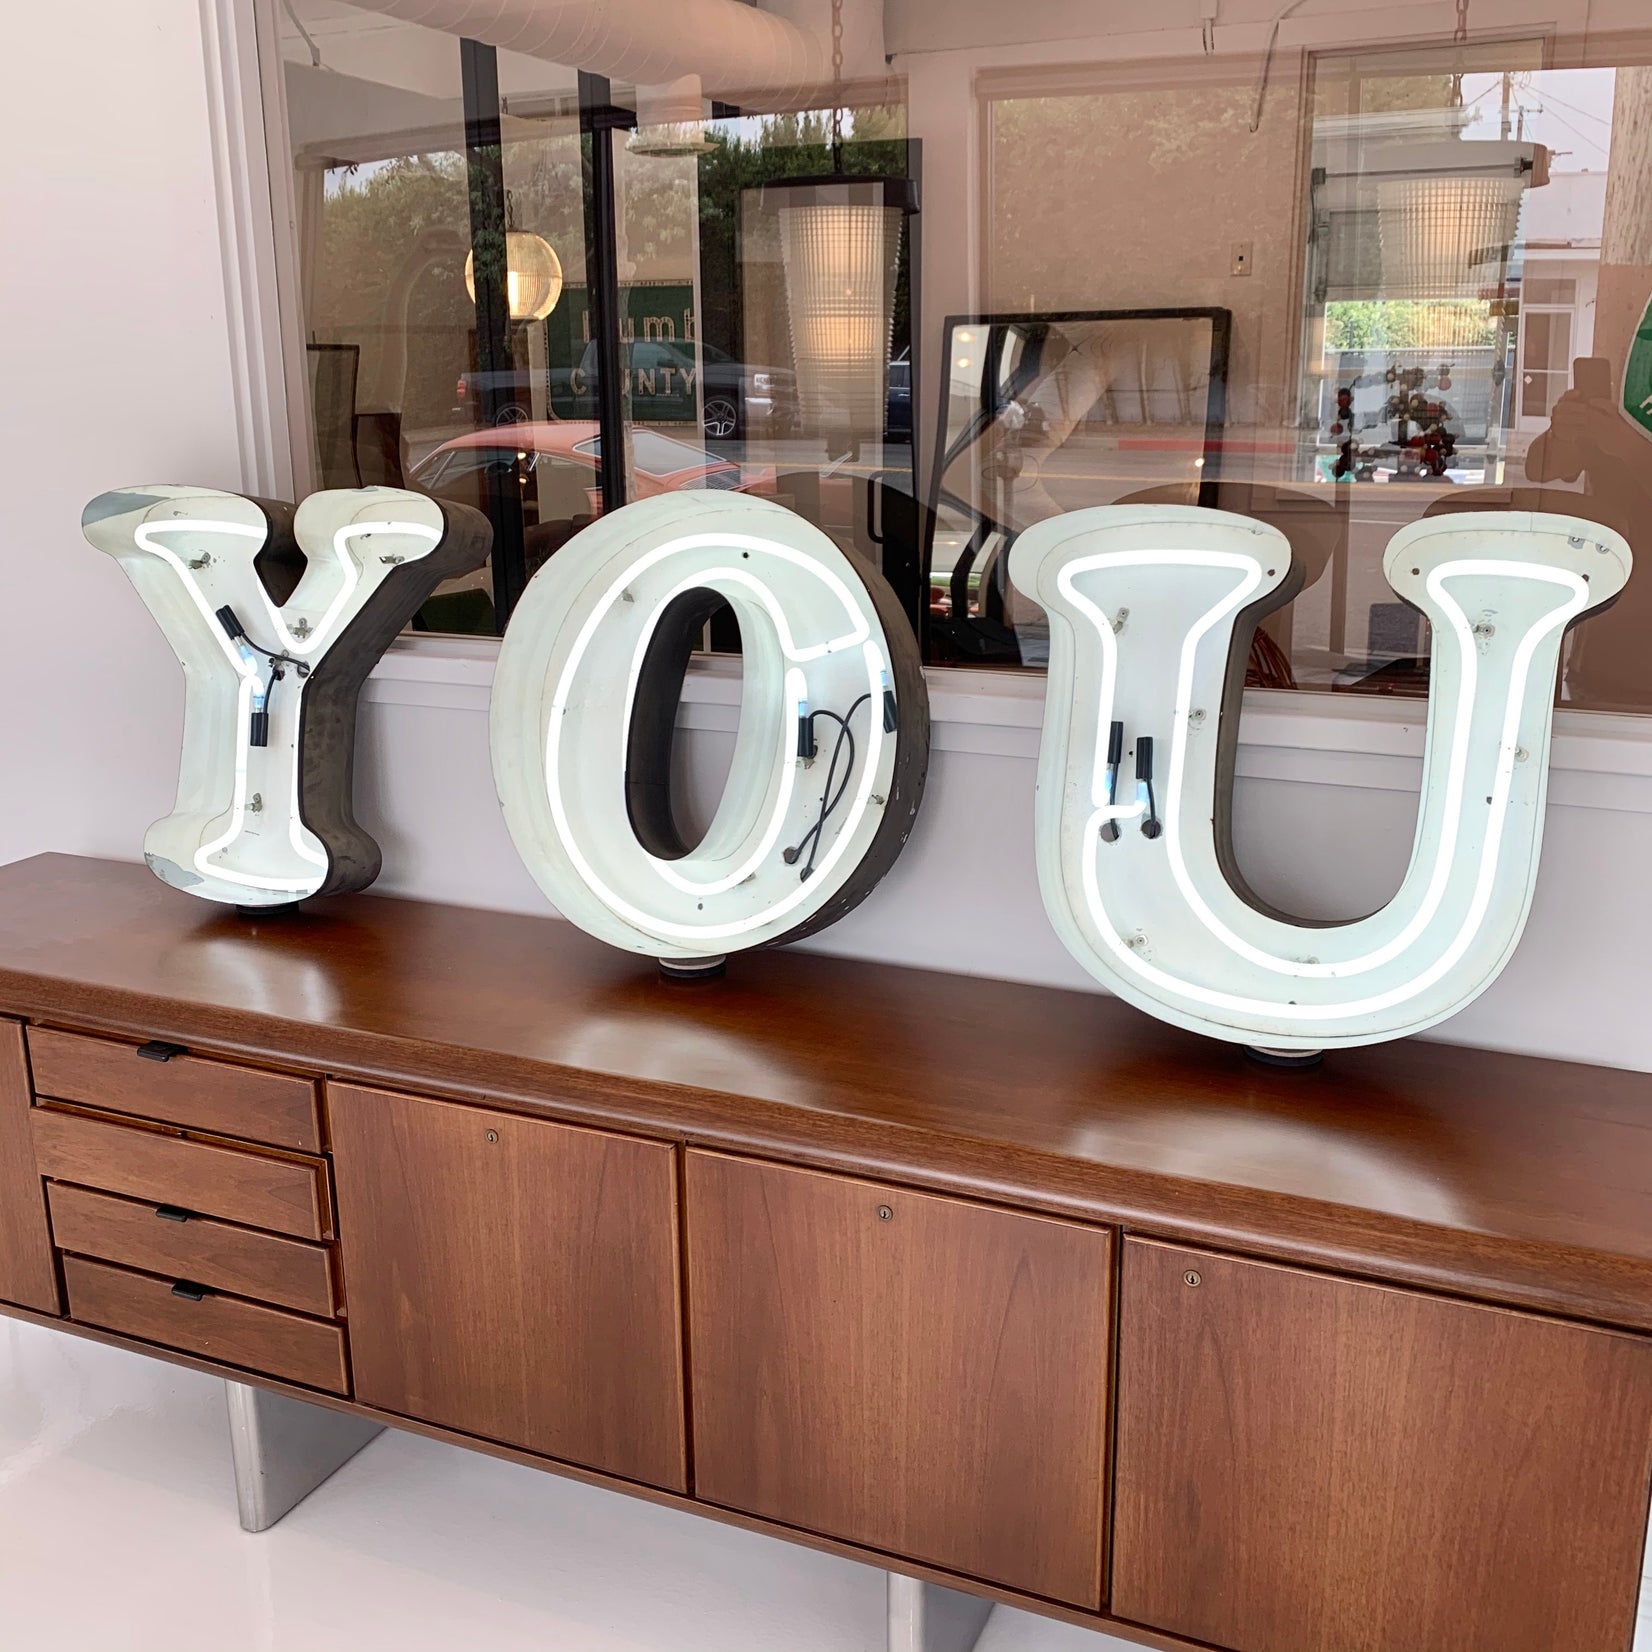 Vintage Neon "YOU" Sign